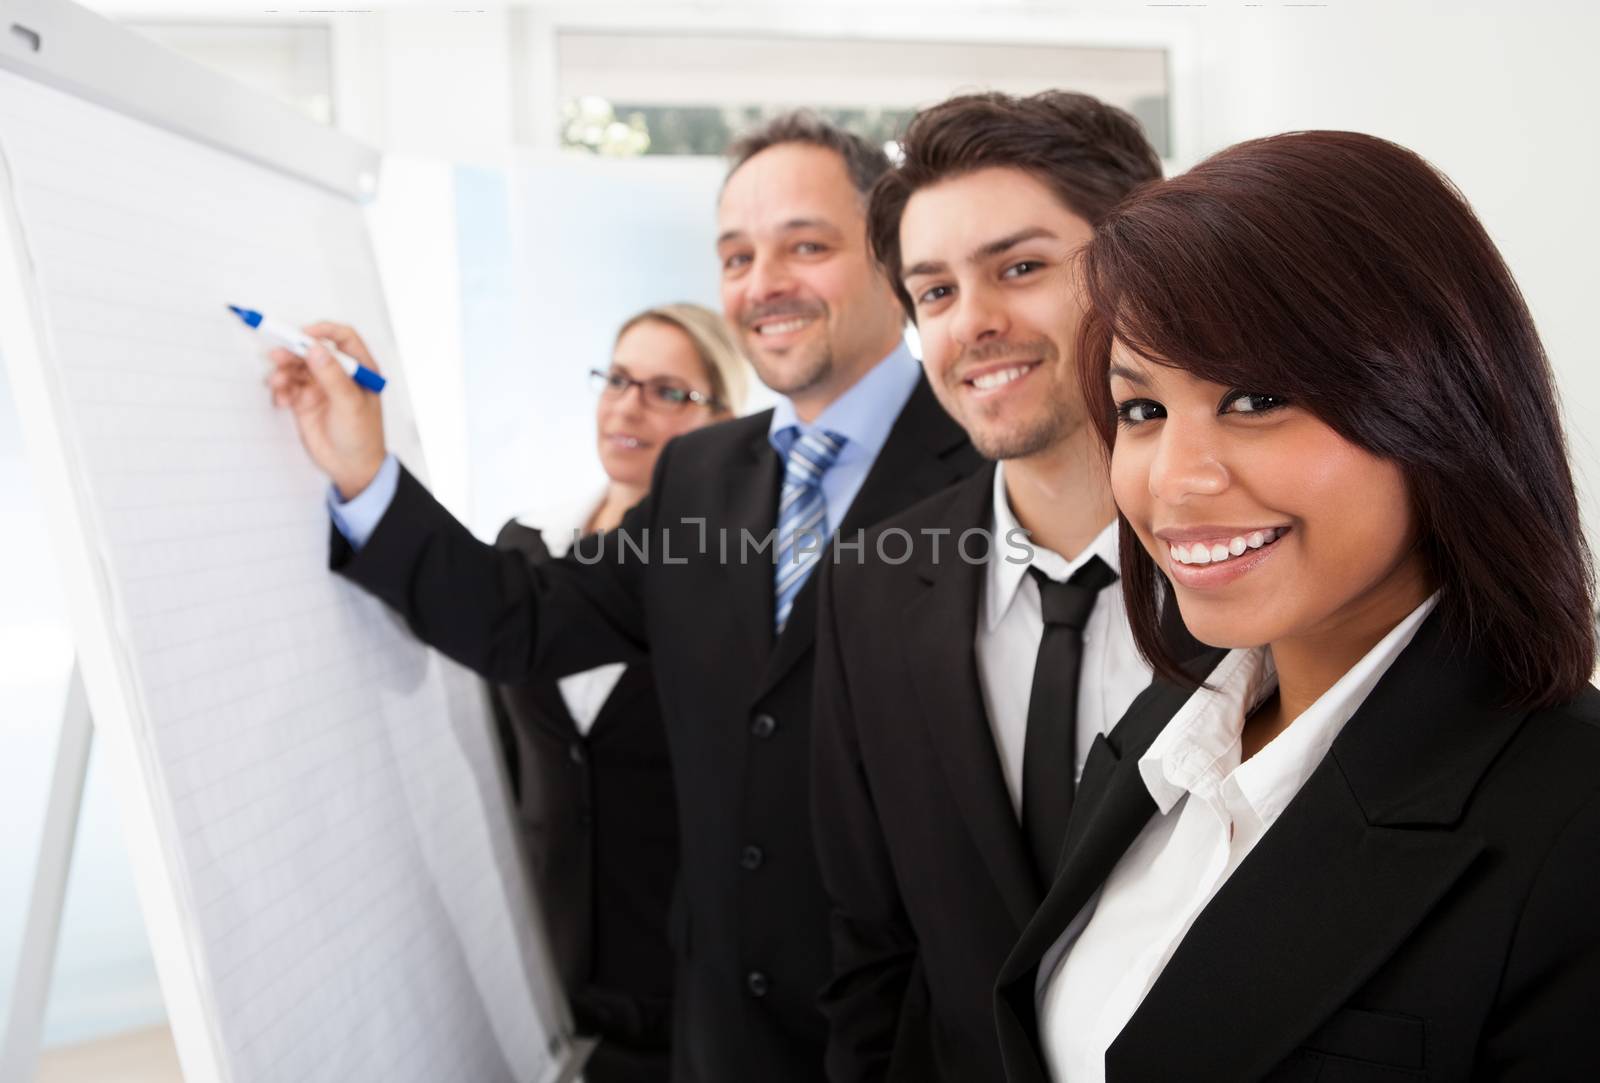 Group of business people looking at the graph on flipchart